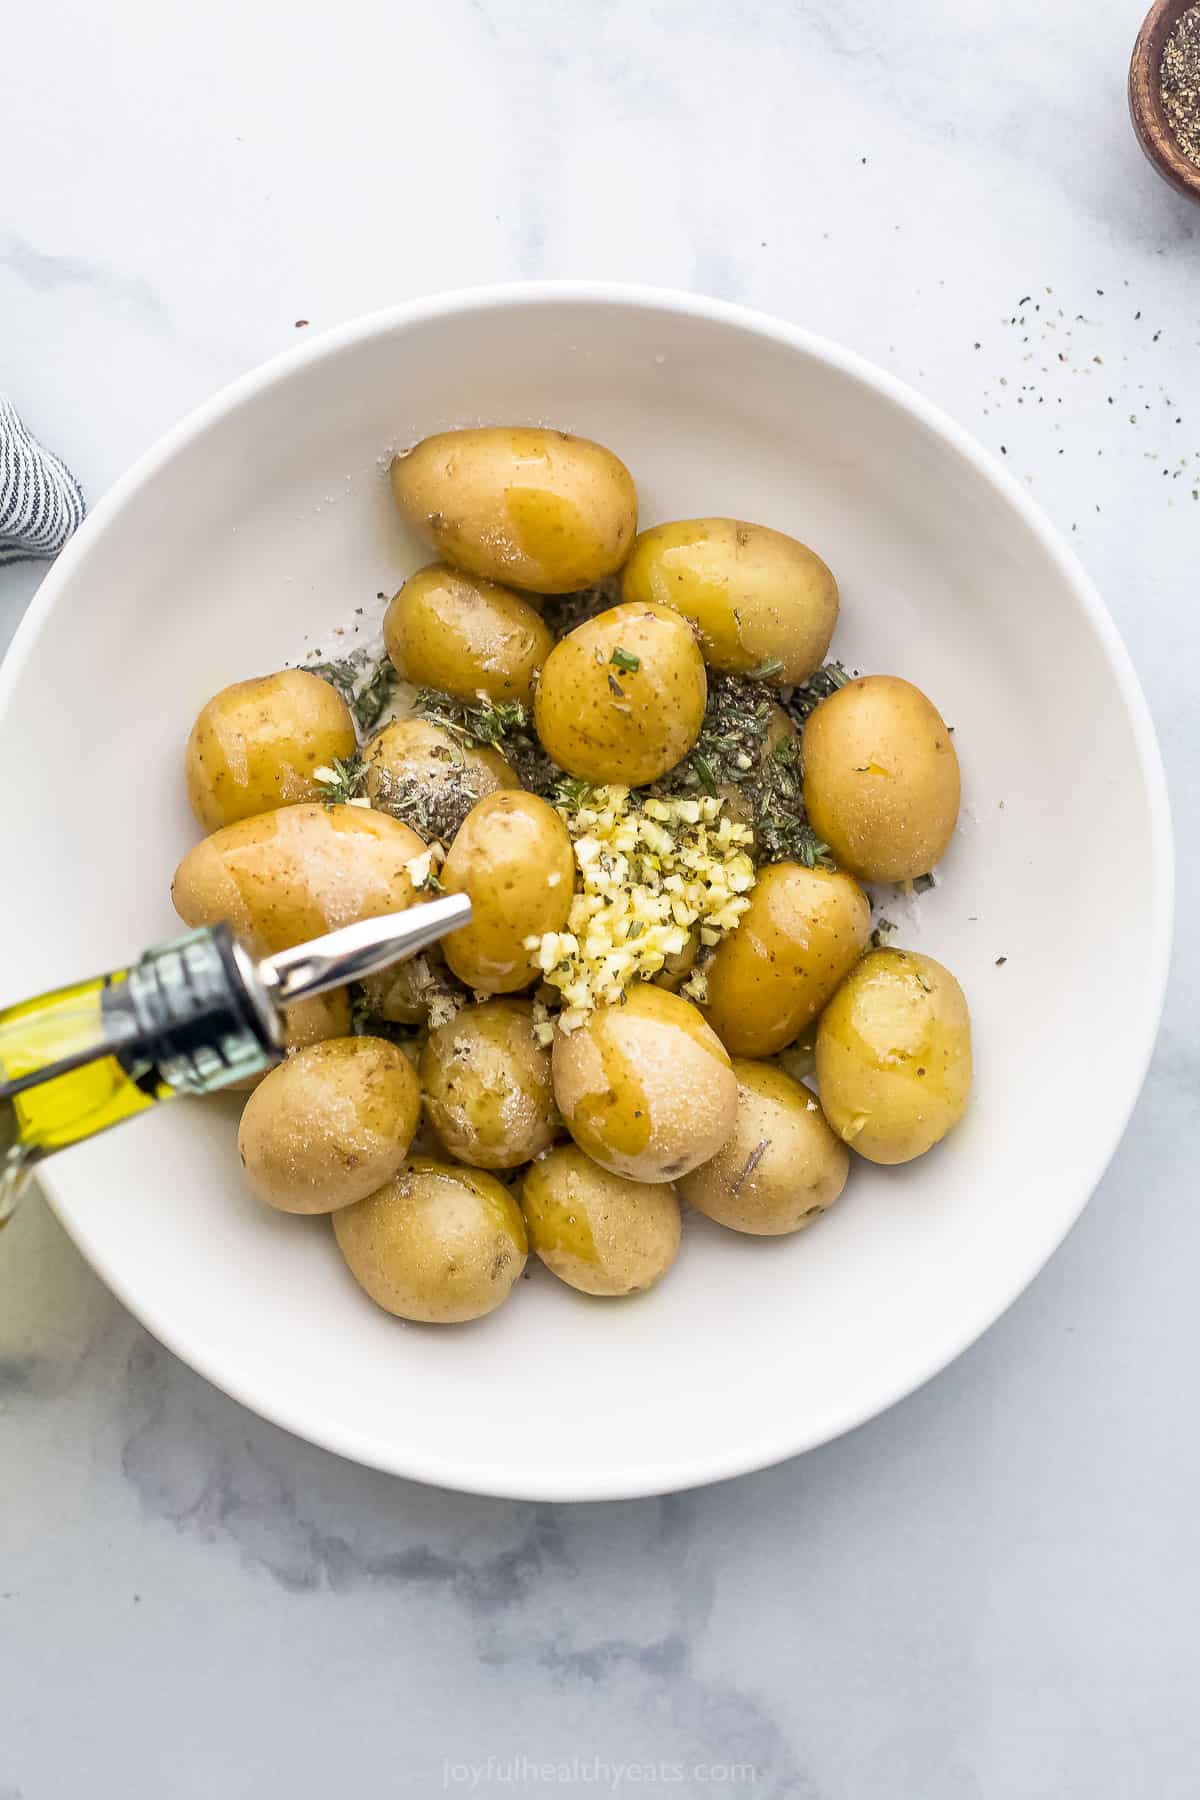 Olive oil being poured into a bowl containing baby potatoes, minced garlic and chopped fresh herbs